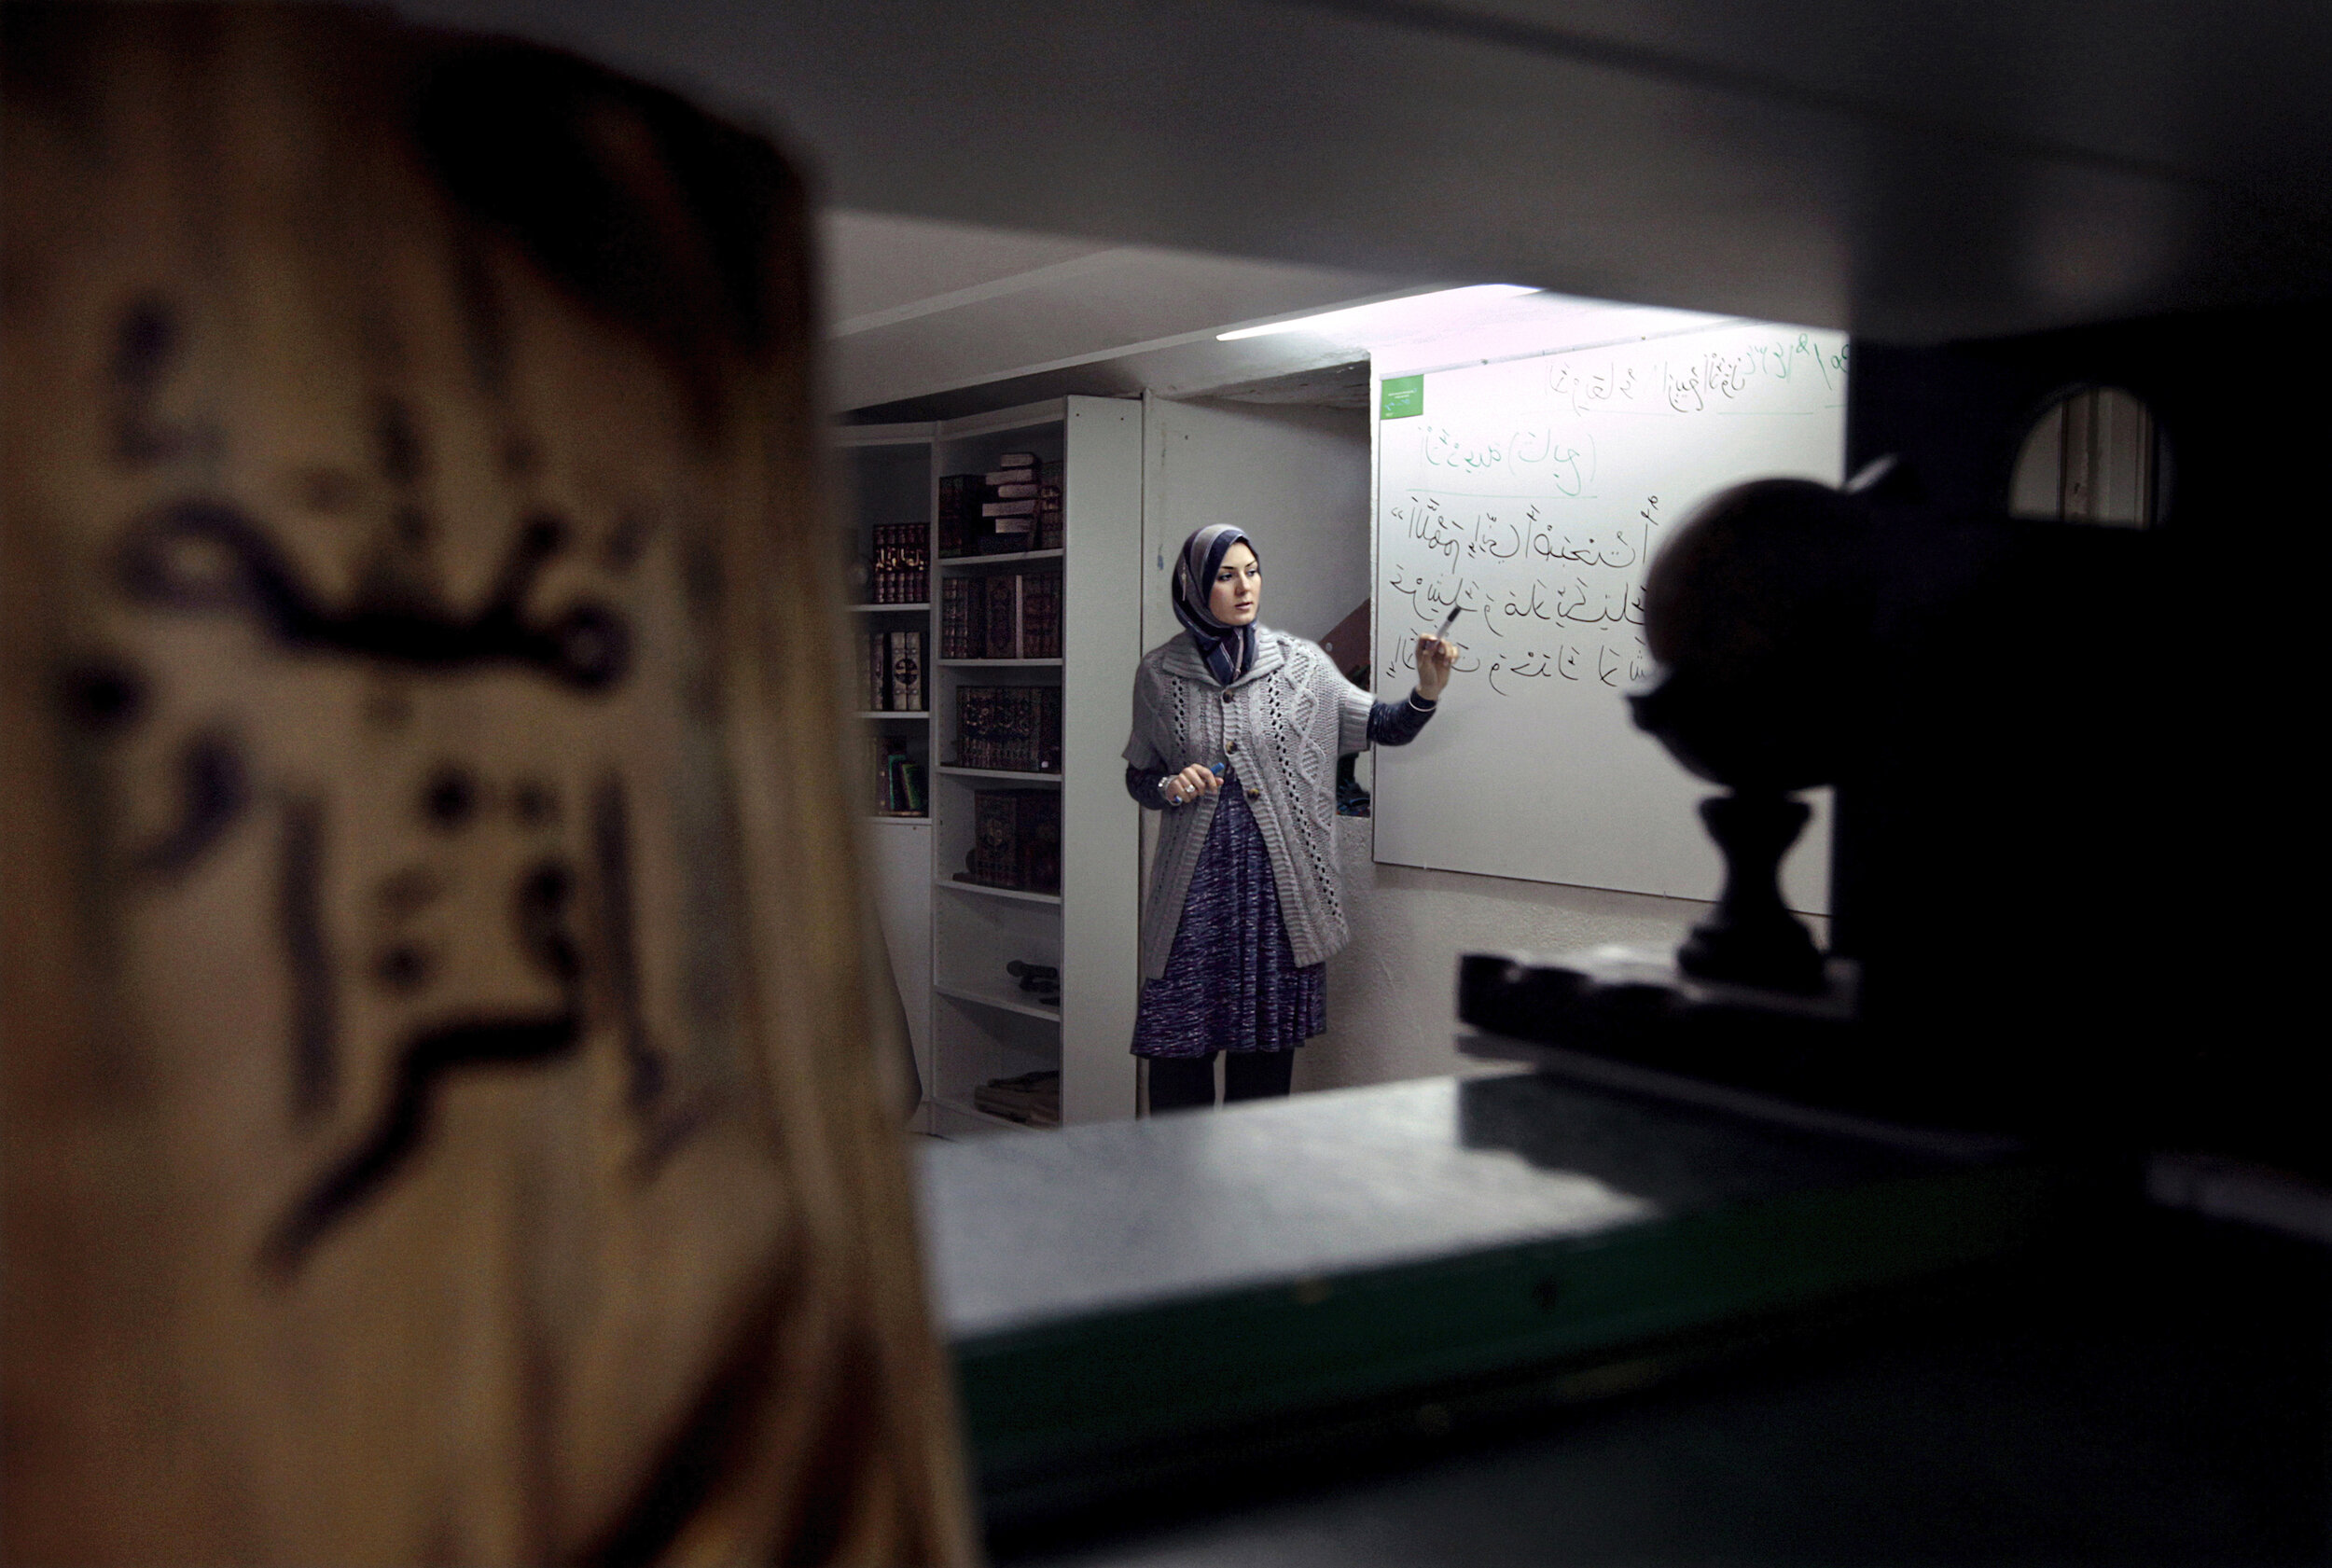   France. Marseille. 2013. WafaaAllal, 33, works as a part-time Arabic teacher conducting classes at the basement of an Islamic library. She is a single mother and has a 7-year old daughter. Wafaa has a Master’s degree in Translation [Arabic, Spanish